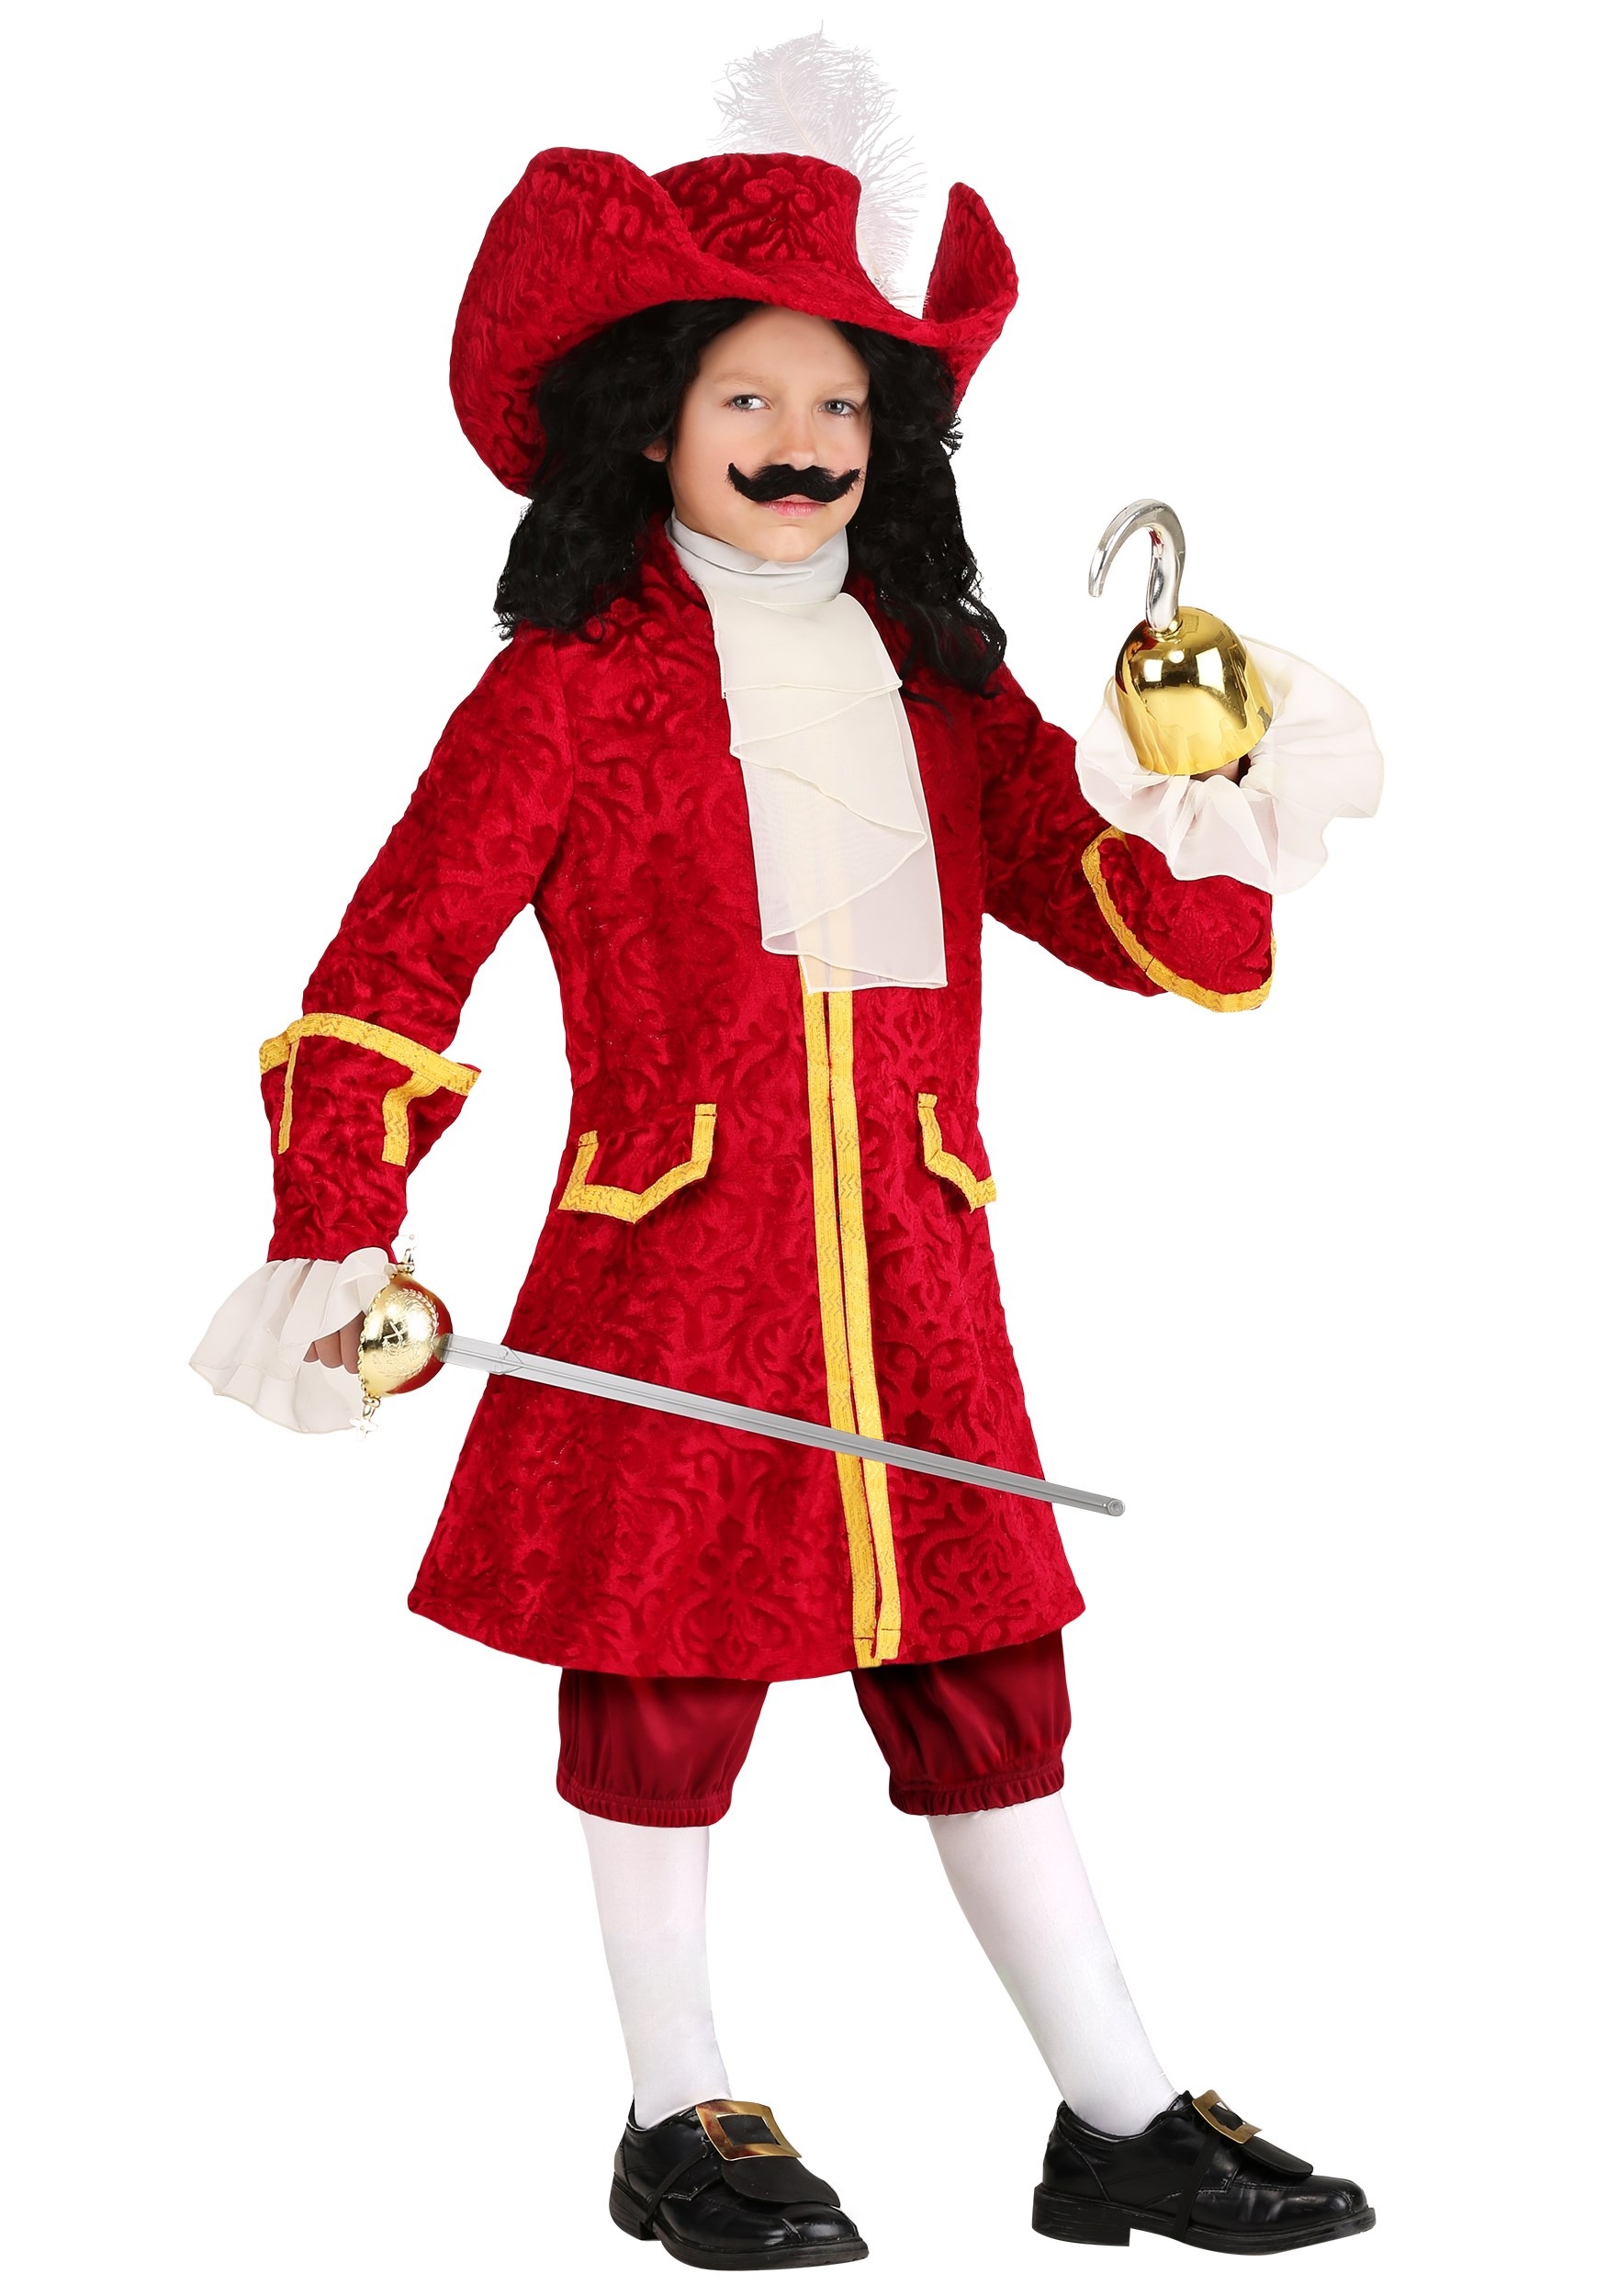 Make Your Own Captain Hook Costume